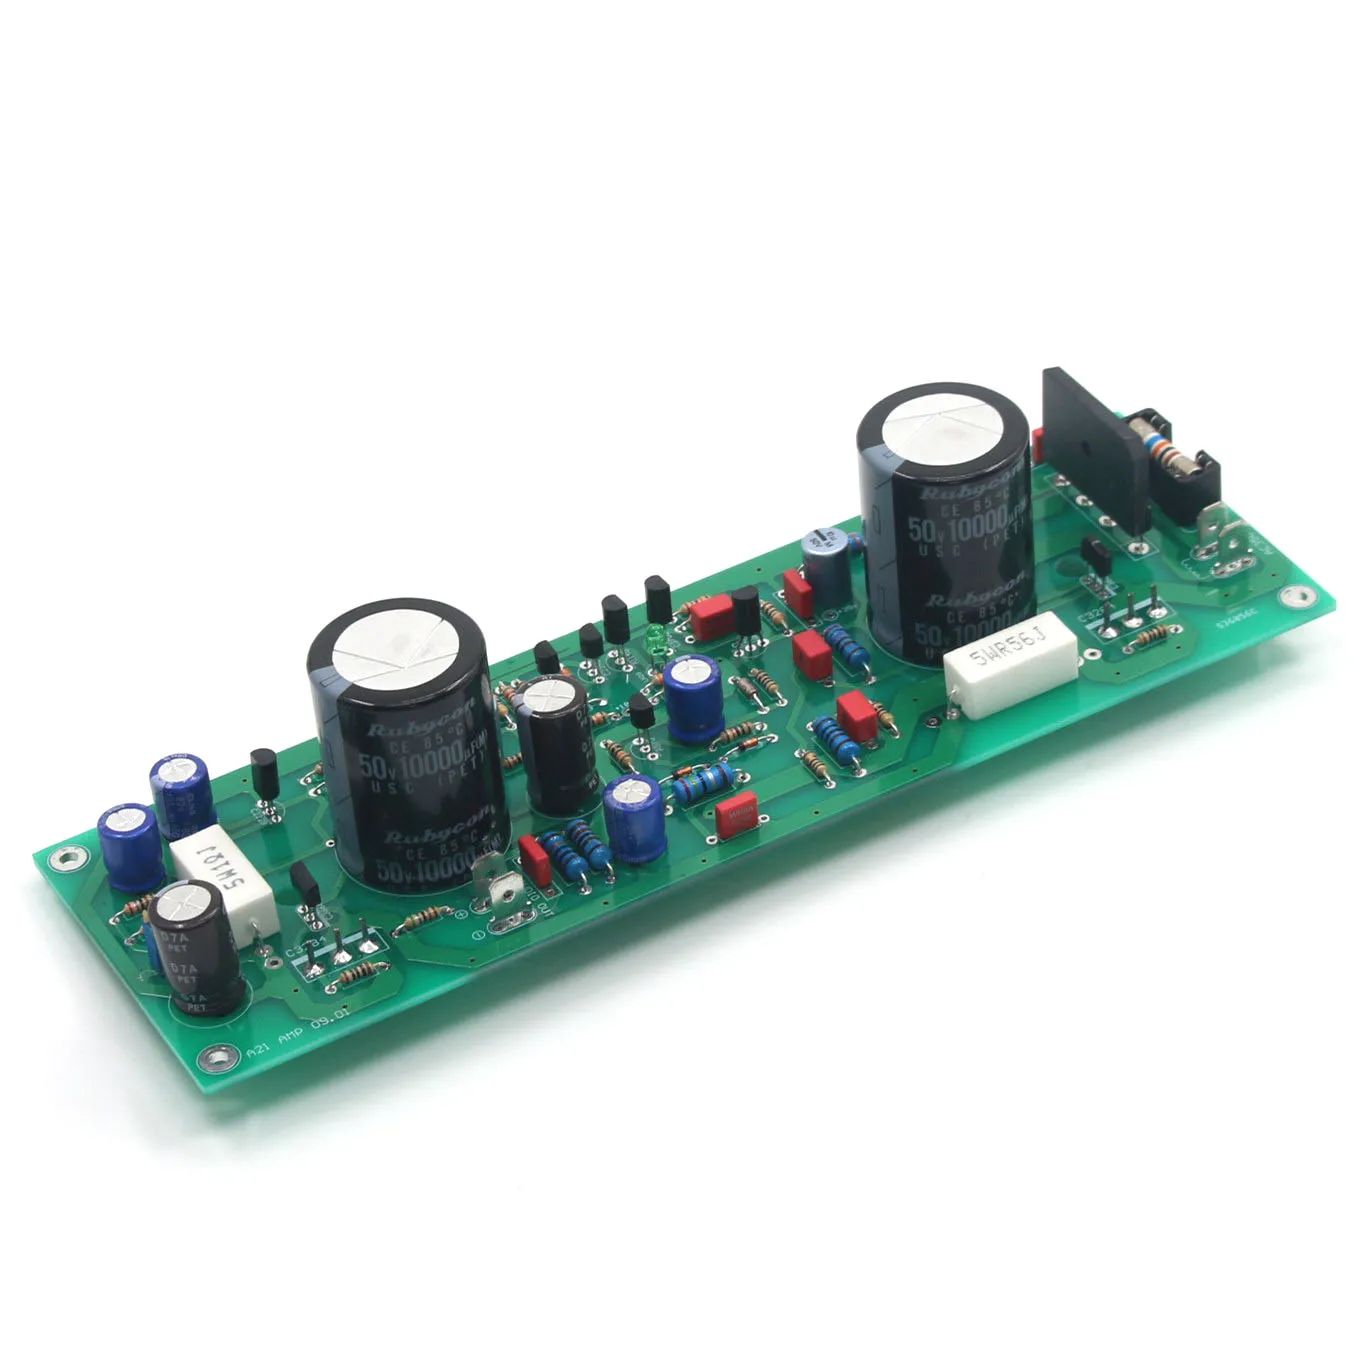 

Assembled Mono 21W Pure Class A Single-Ended Audio Power Amplifier Board Based On Sugden A21